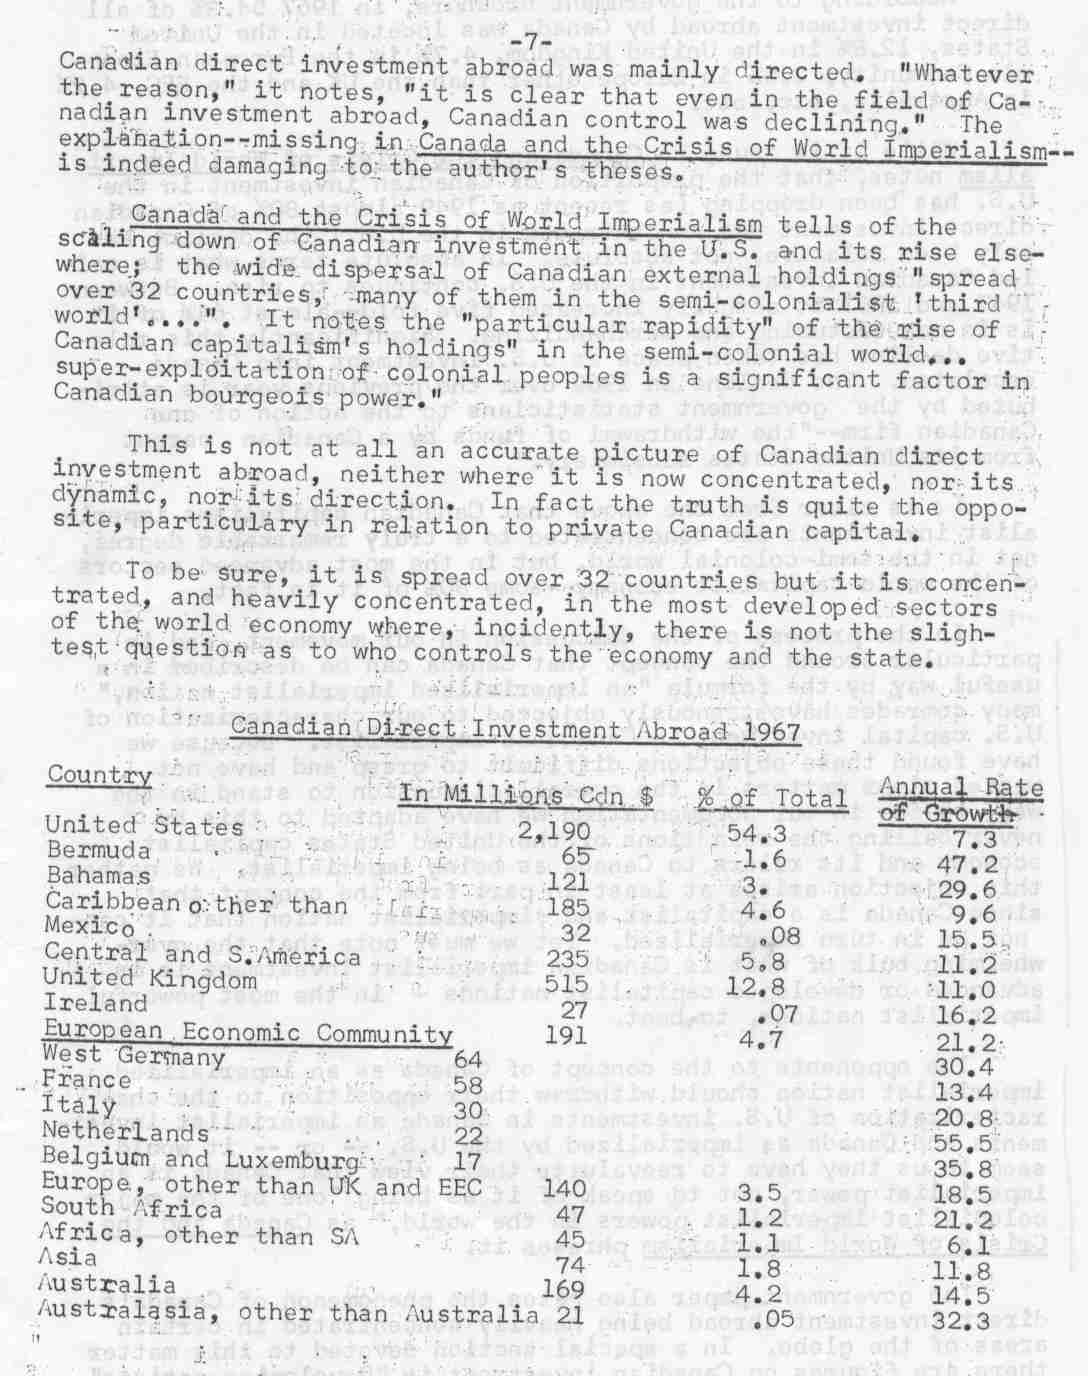 table, from the Department of Industry, Trade & Commerce, <strong>Direct Investment Abroad by Canada, 1946-67</strong>, February 1971